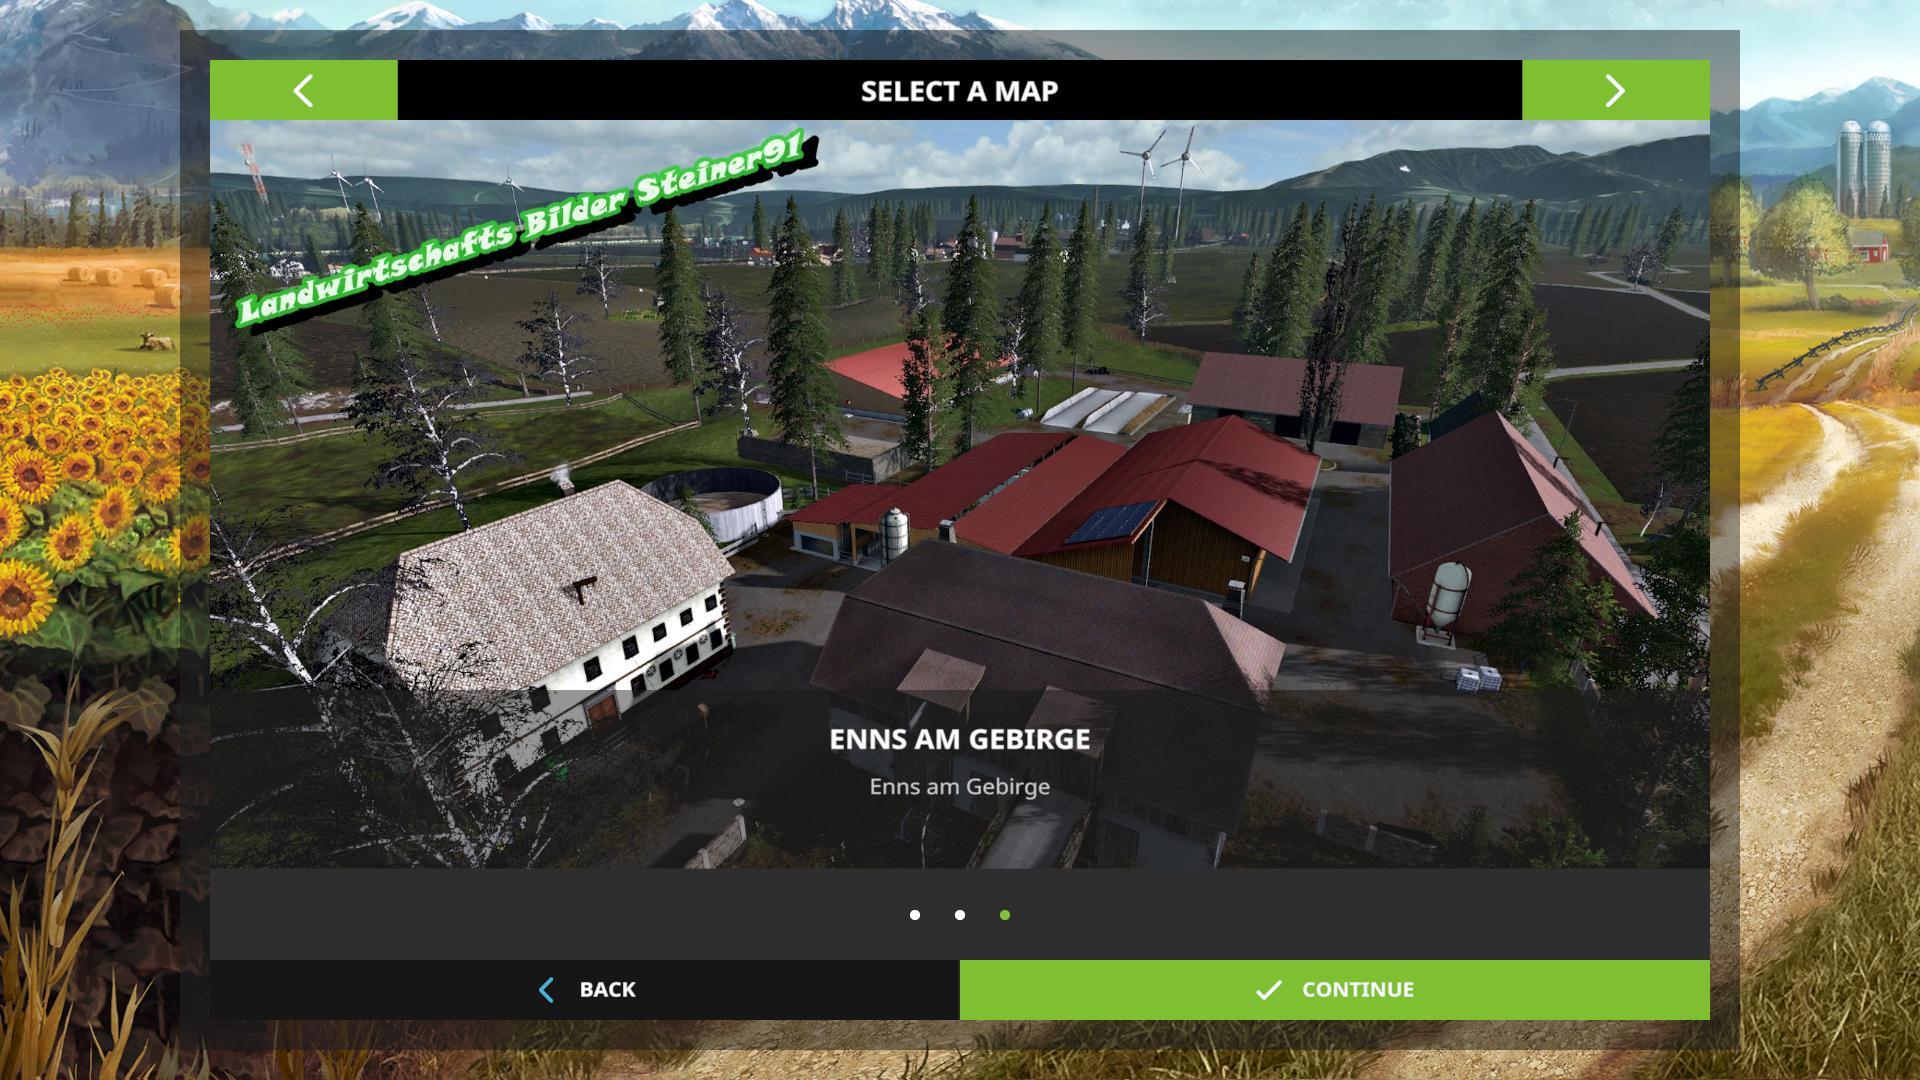 Best Fs19 Maps Mods Farming Simulator 19 2019 Maps To Download